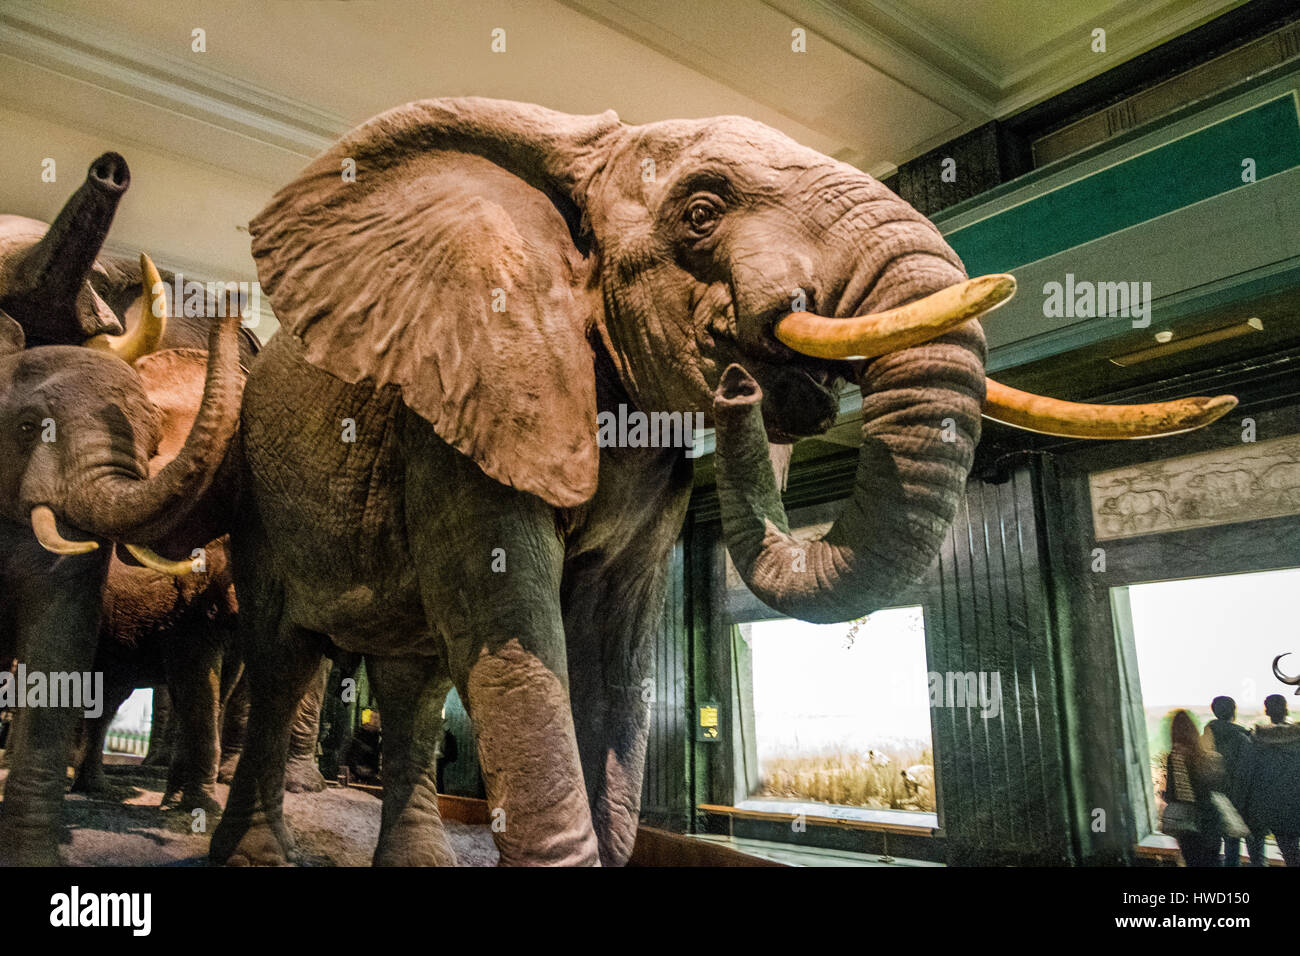 Elephant Models at Hall of African Mammals of the American museum of Natural History (AMNH) - New York, USA Stock Photo